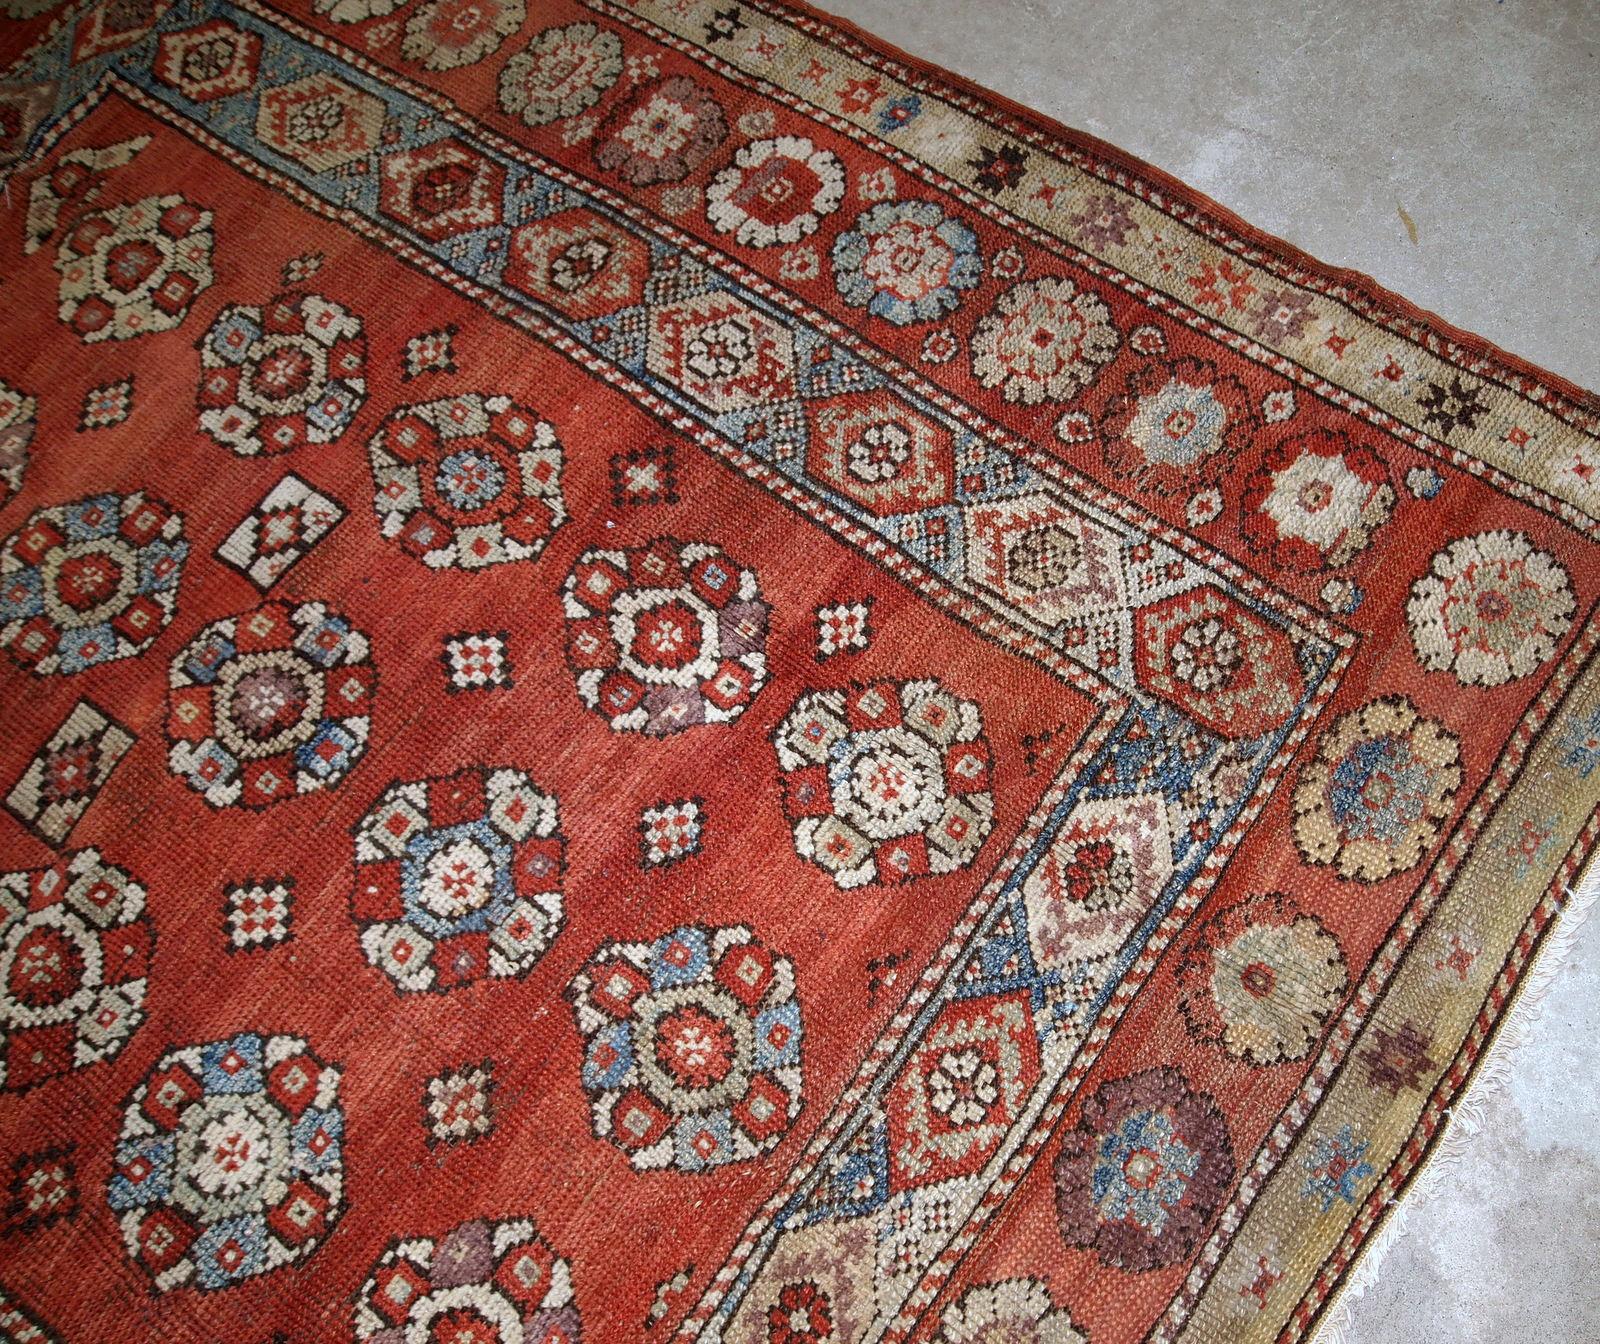 Handmade antique Turkish Melas rug in red, sky blue and beige shades. The rug is from the end of 19th century in original good condition.

-condition: original good,

-circa: 1880s,

-size: 5.8' x 6.1' (177cm x 186cm),

-material: